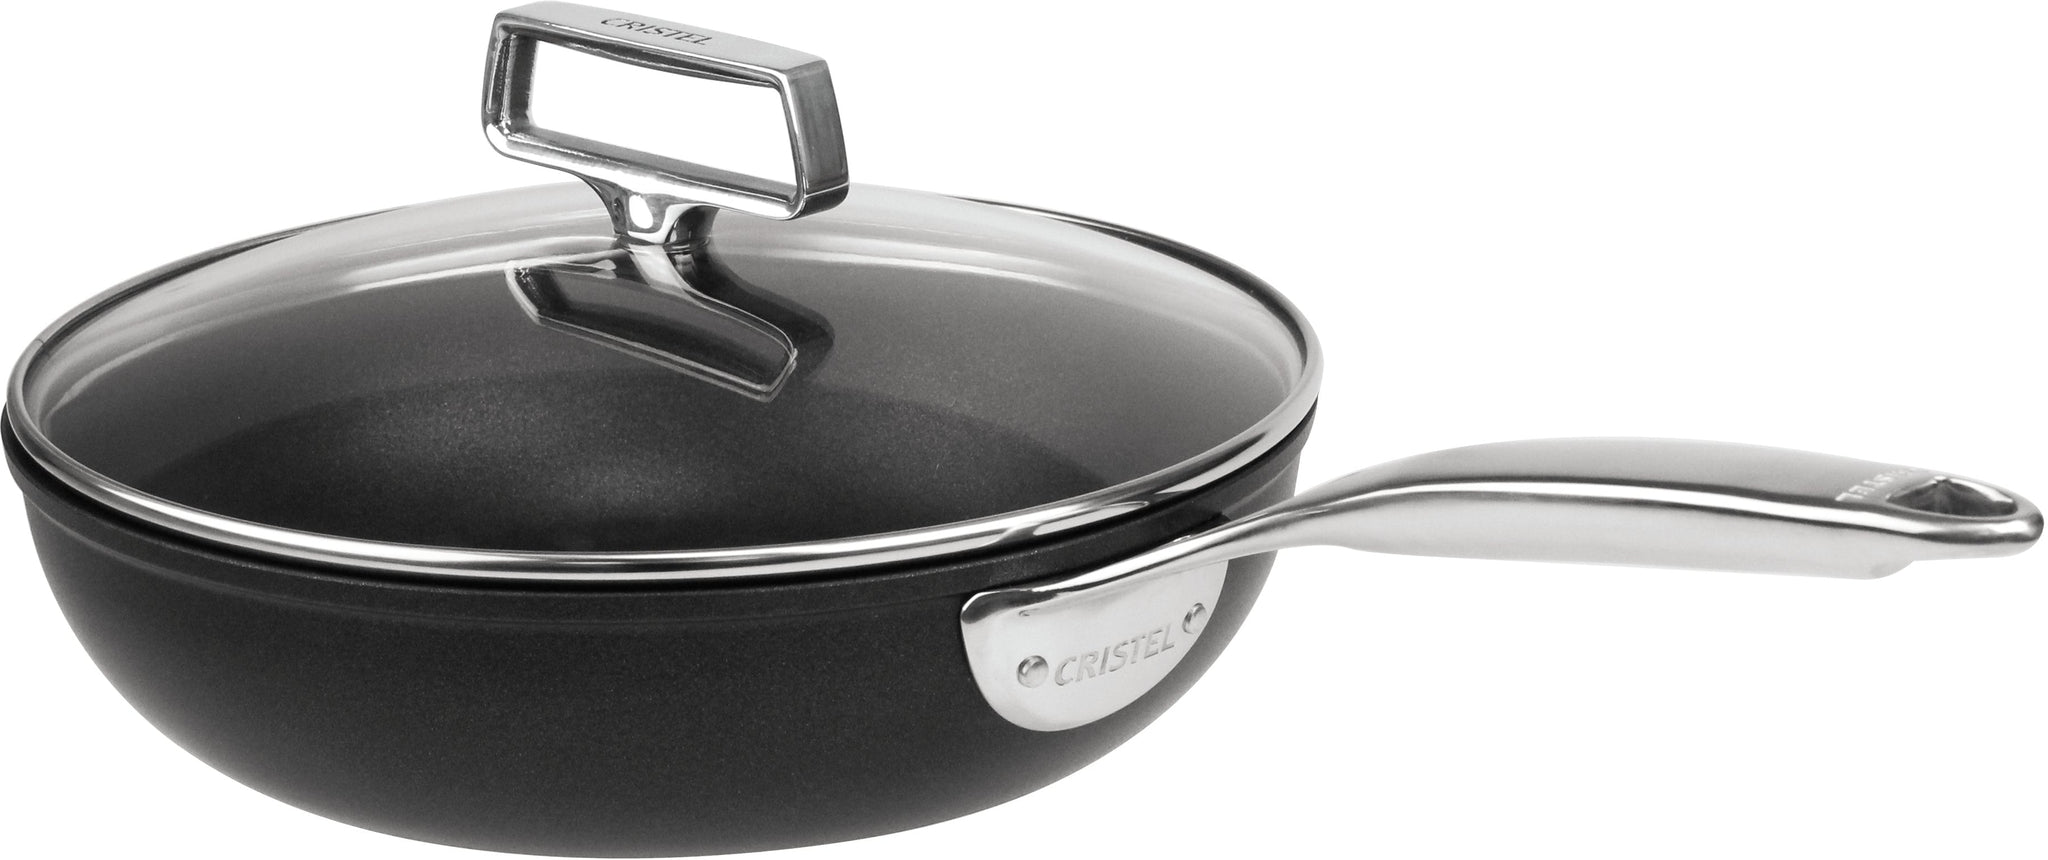 Cristel - 1.9 QT Non-Stick Sauté-Pan With Lid and Fixed Handle Castel'Pro Ultralu Collection - S24CPFAE